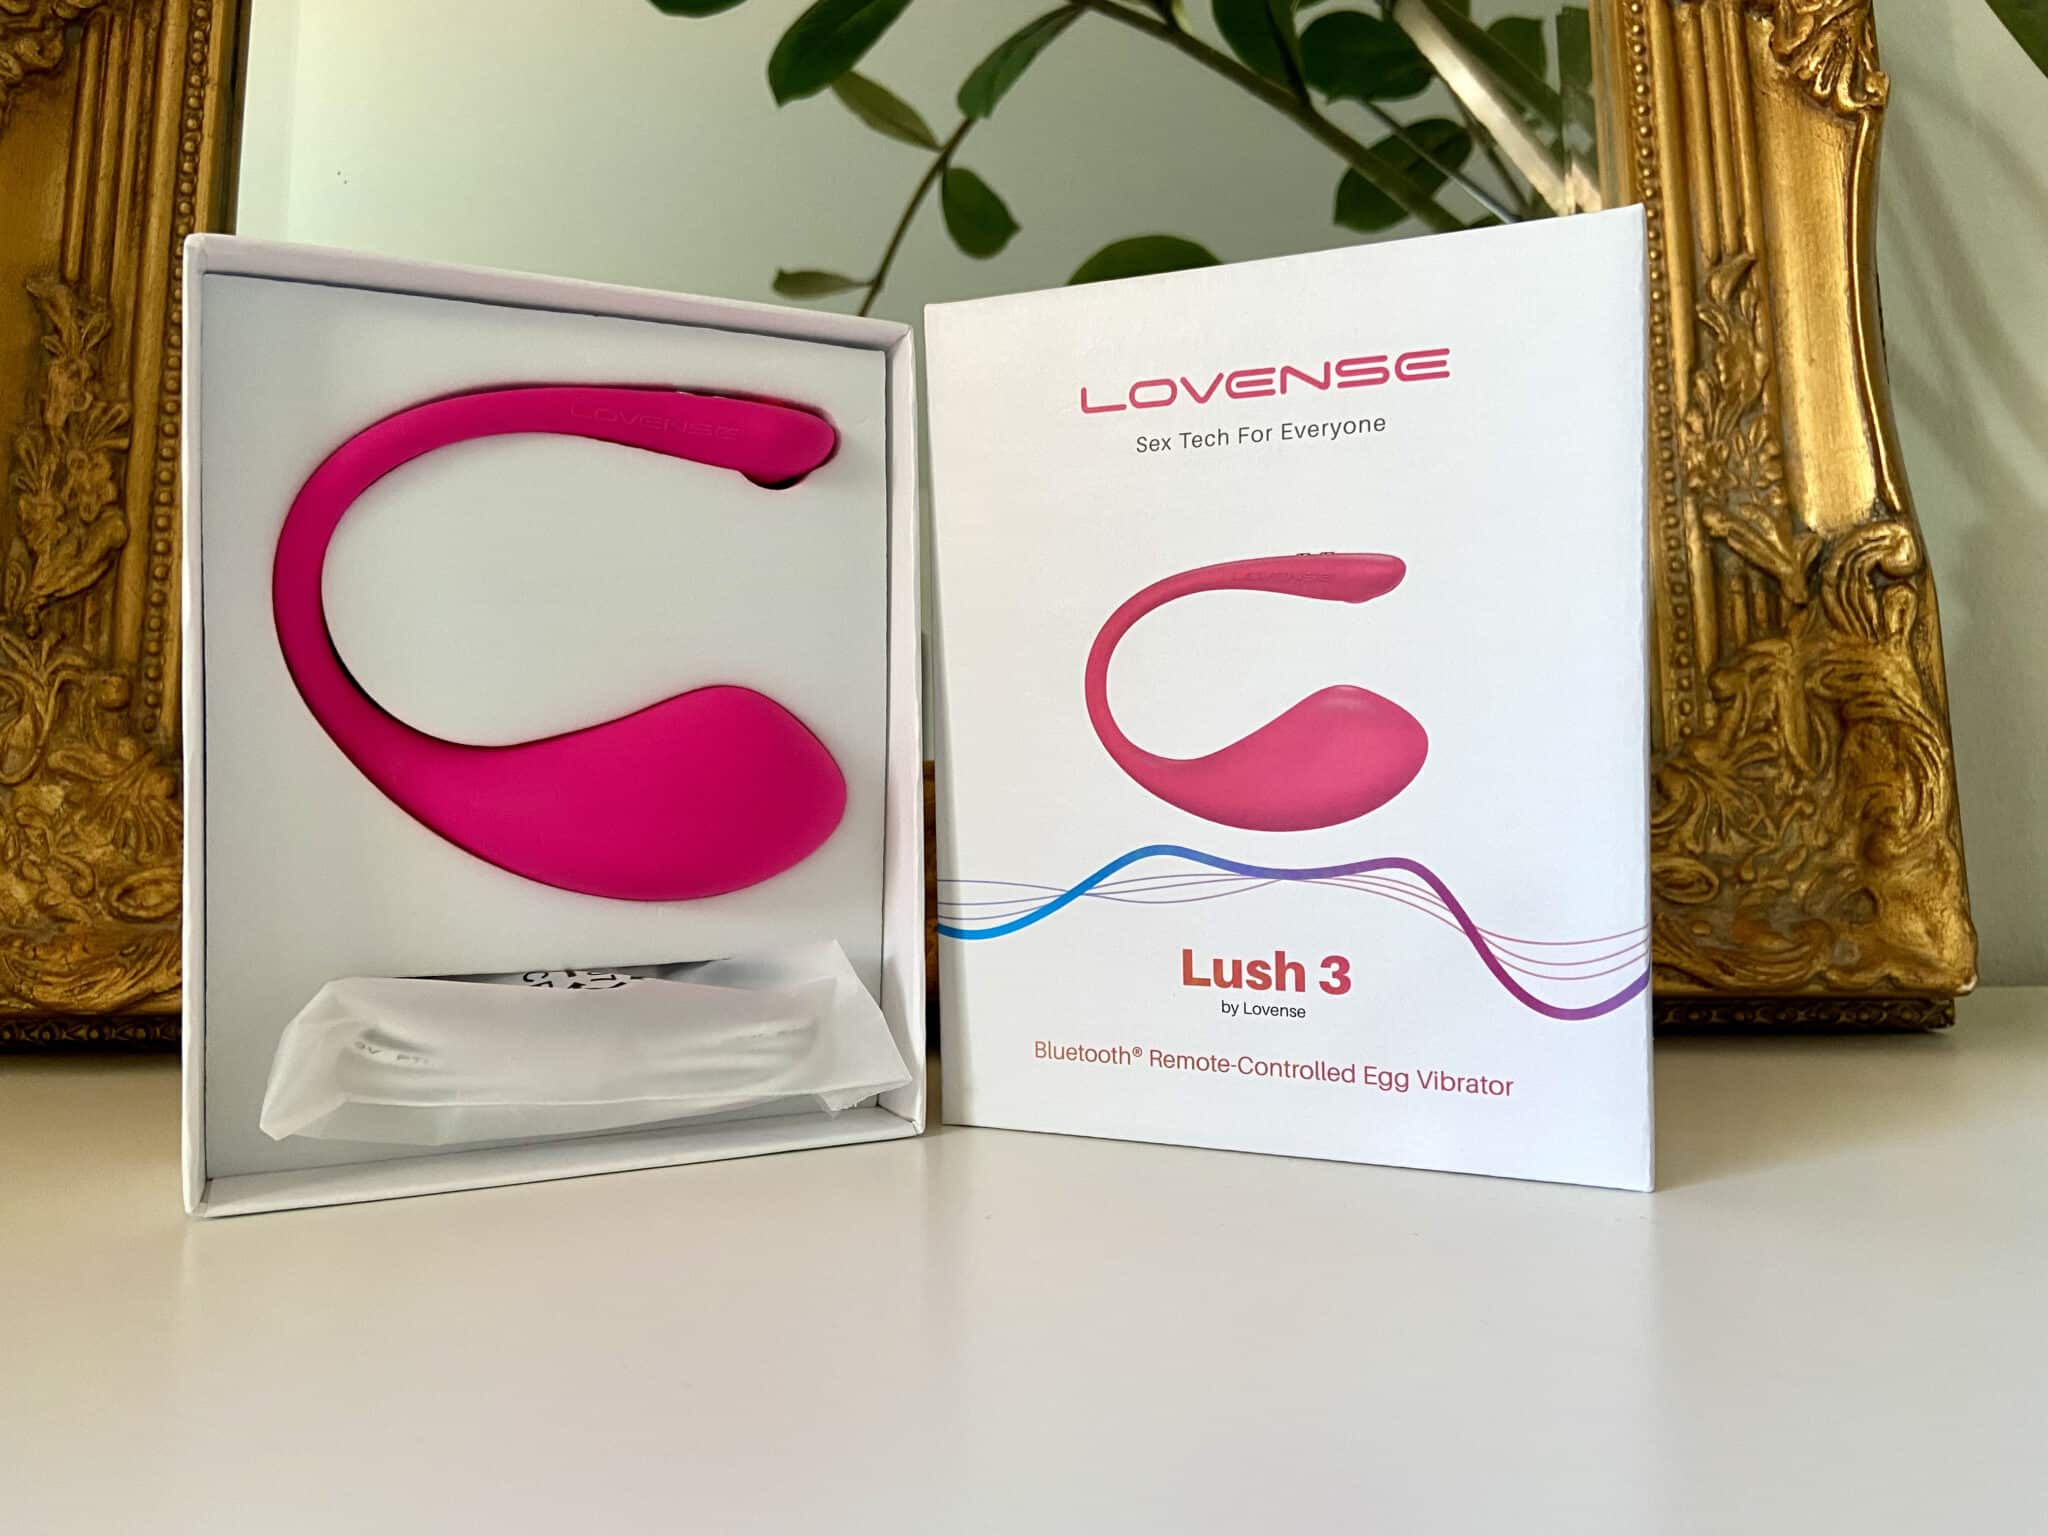 Lovense Lush 3 The Unboxing Experience: A Review